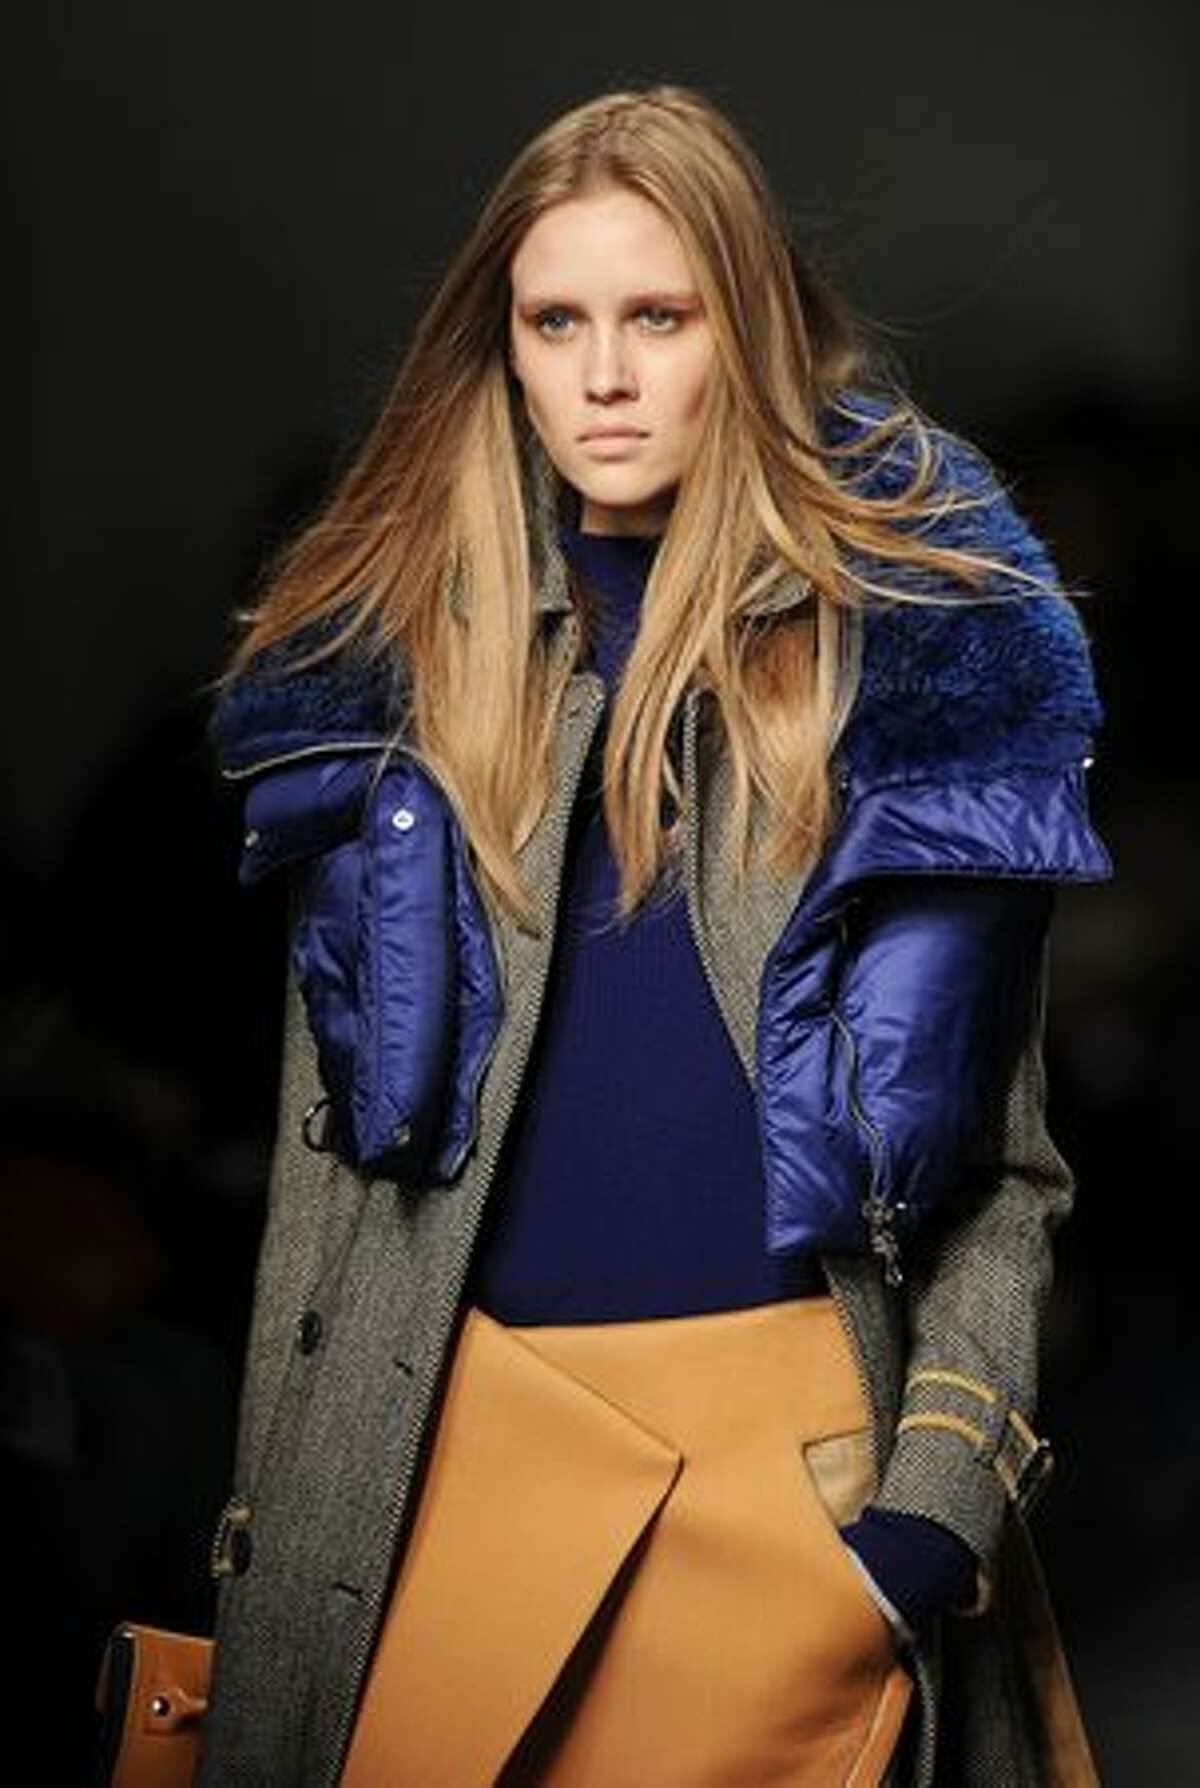 A model wears a creation during the Aquascutum Autumn/Winter 2011 collection show on the fifth day of London Fashion Week.